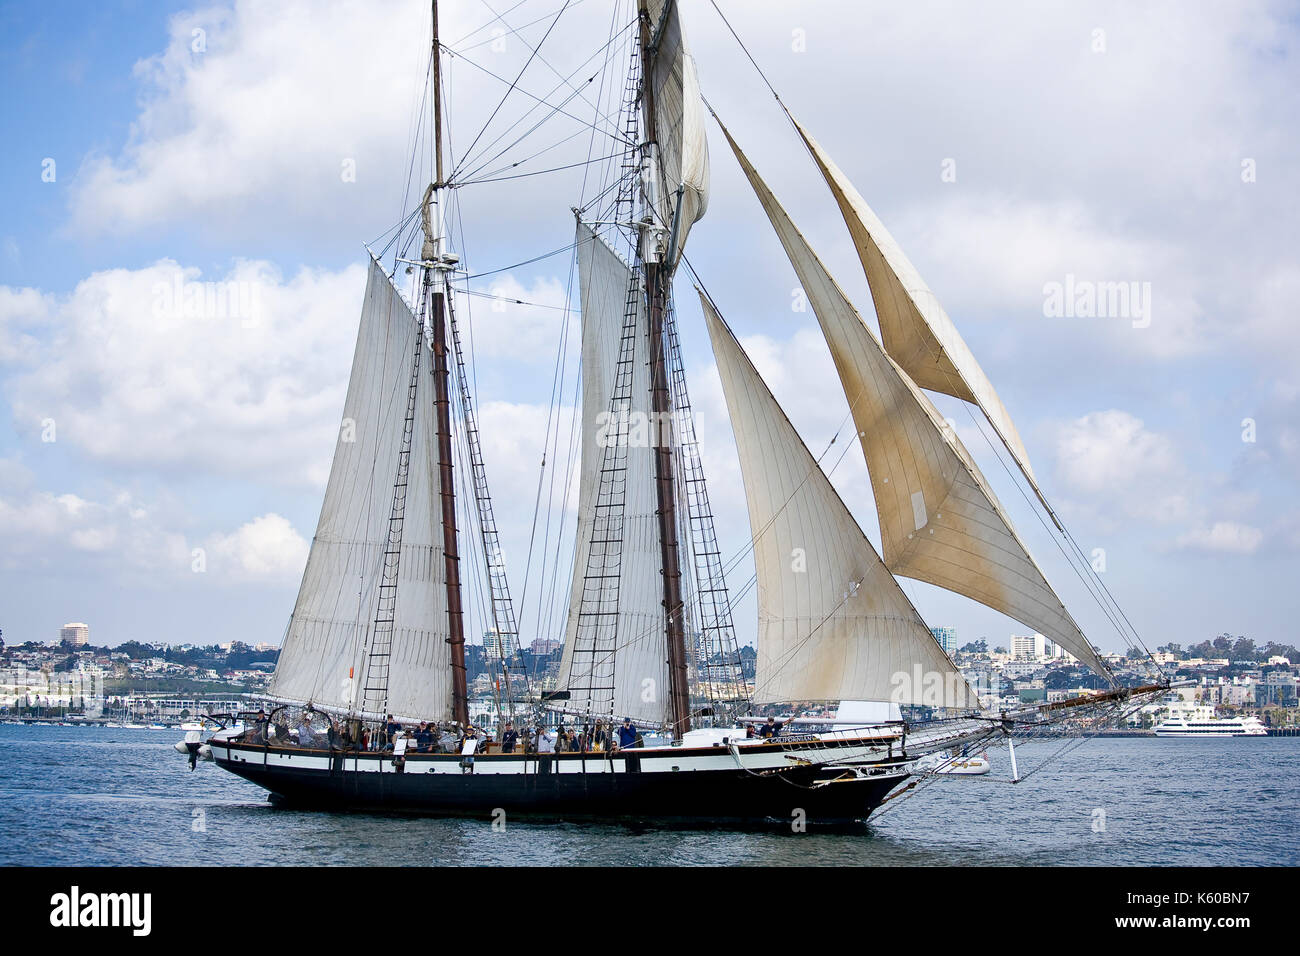 The Californian is a replica of the 1847 Revenue Cutter C.W. Lawrence ...